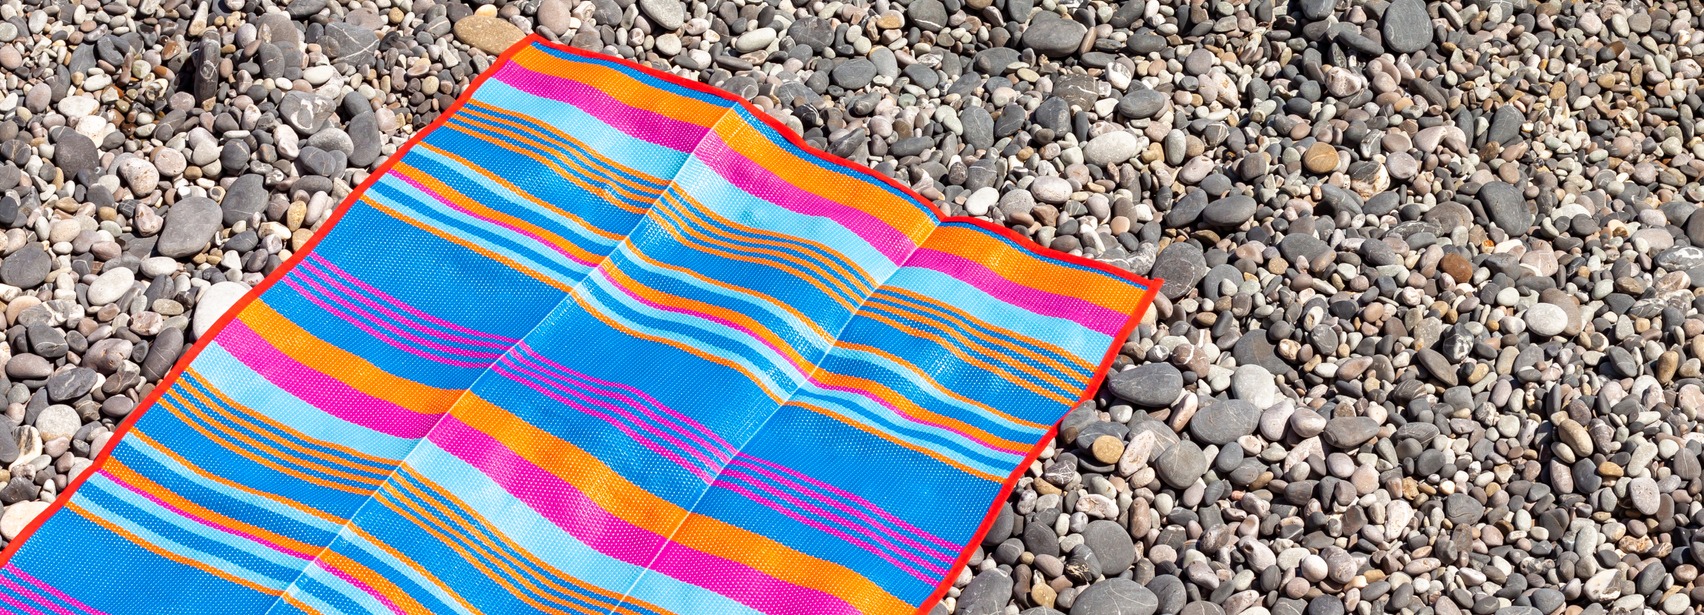 a brightly colored beach mat with stripes is placed on a pebbly beach